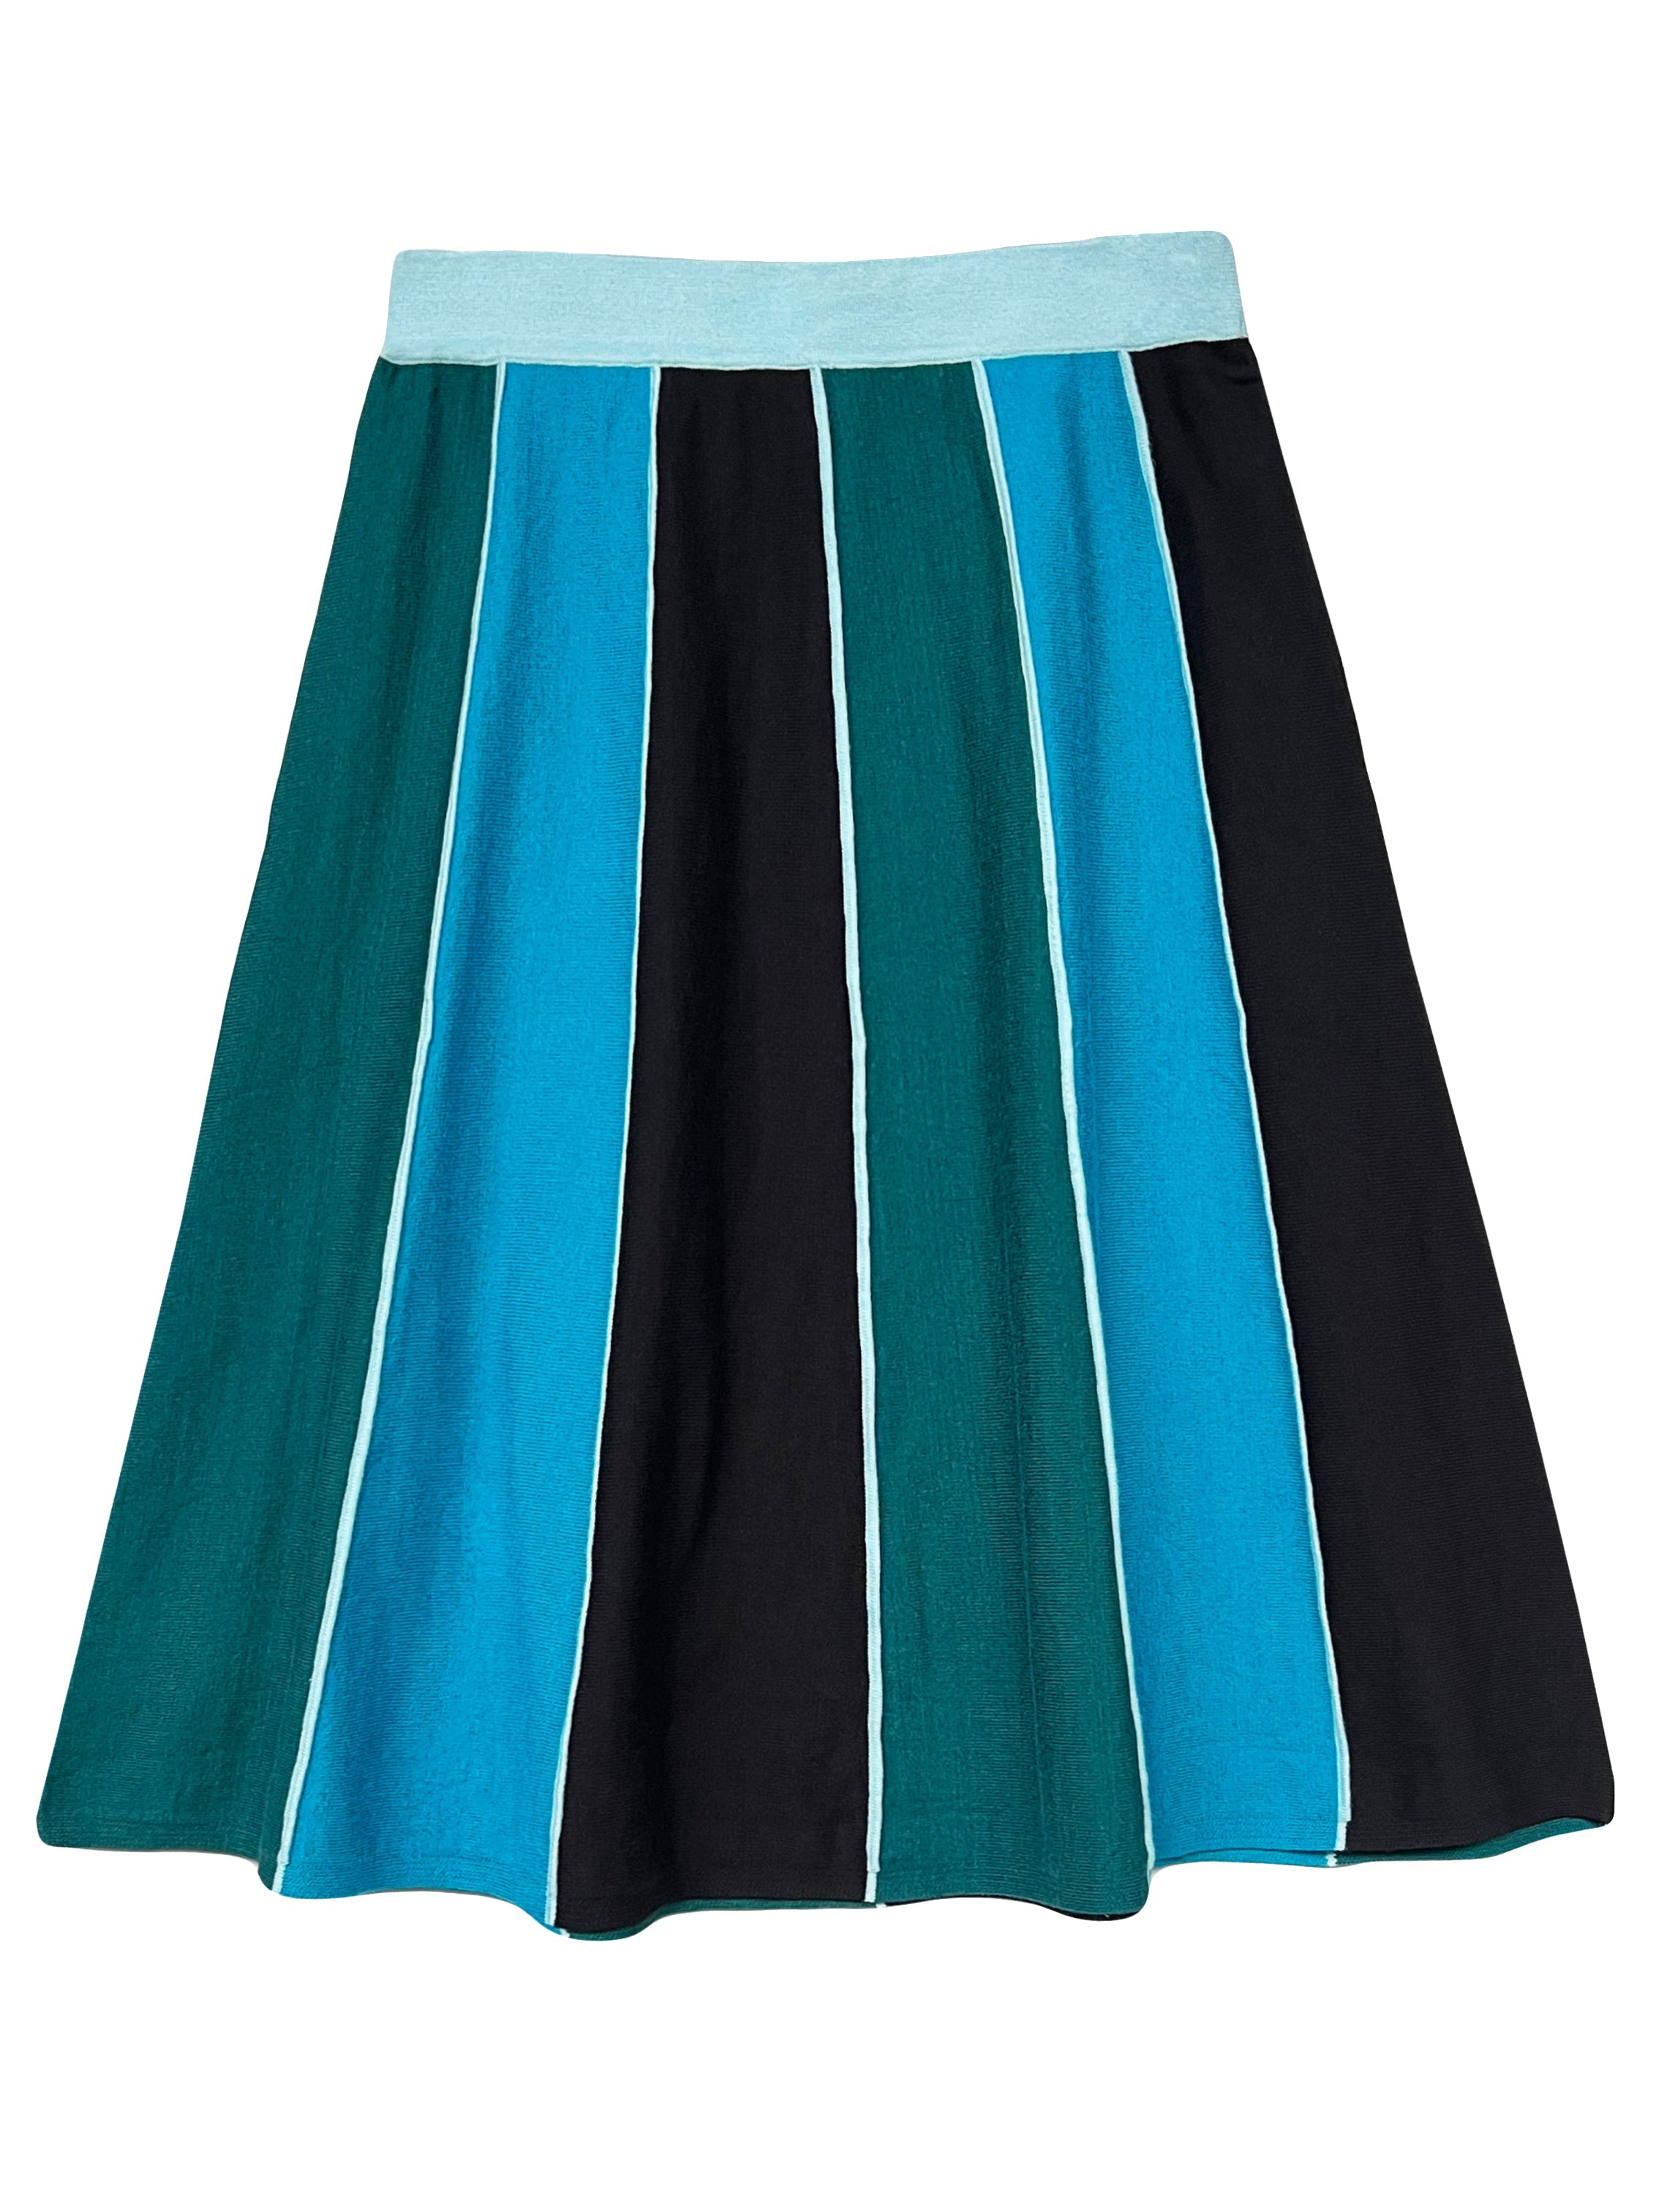 JESSIE knit skirt Teal - Lesley Evers-Shop-Shop/All Products-Shop/Separates